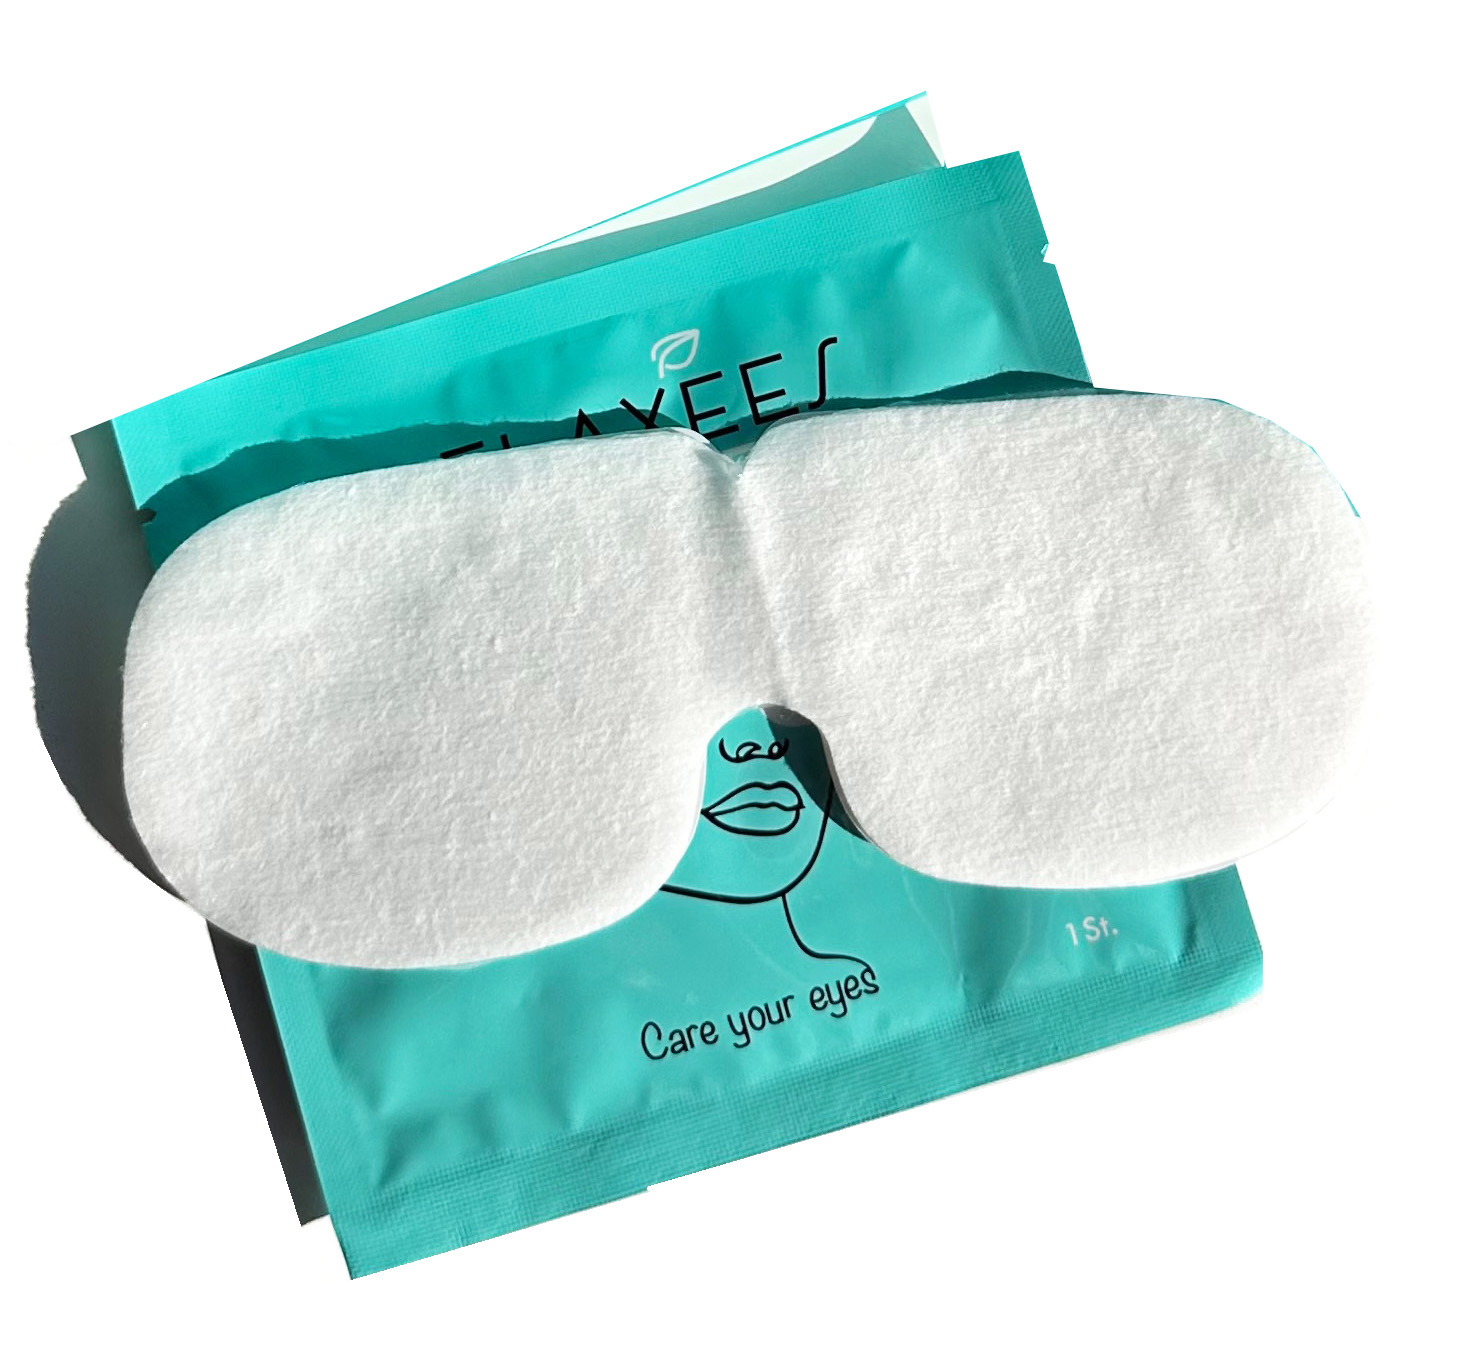 RELAXEES Eye Pads